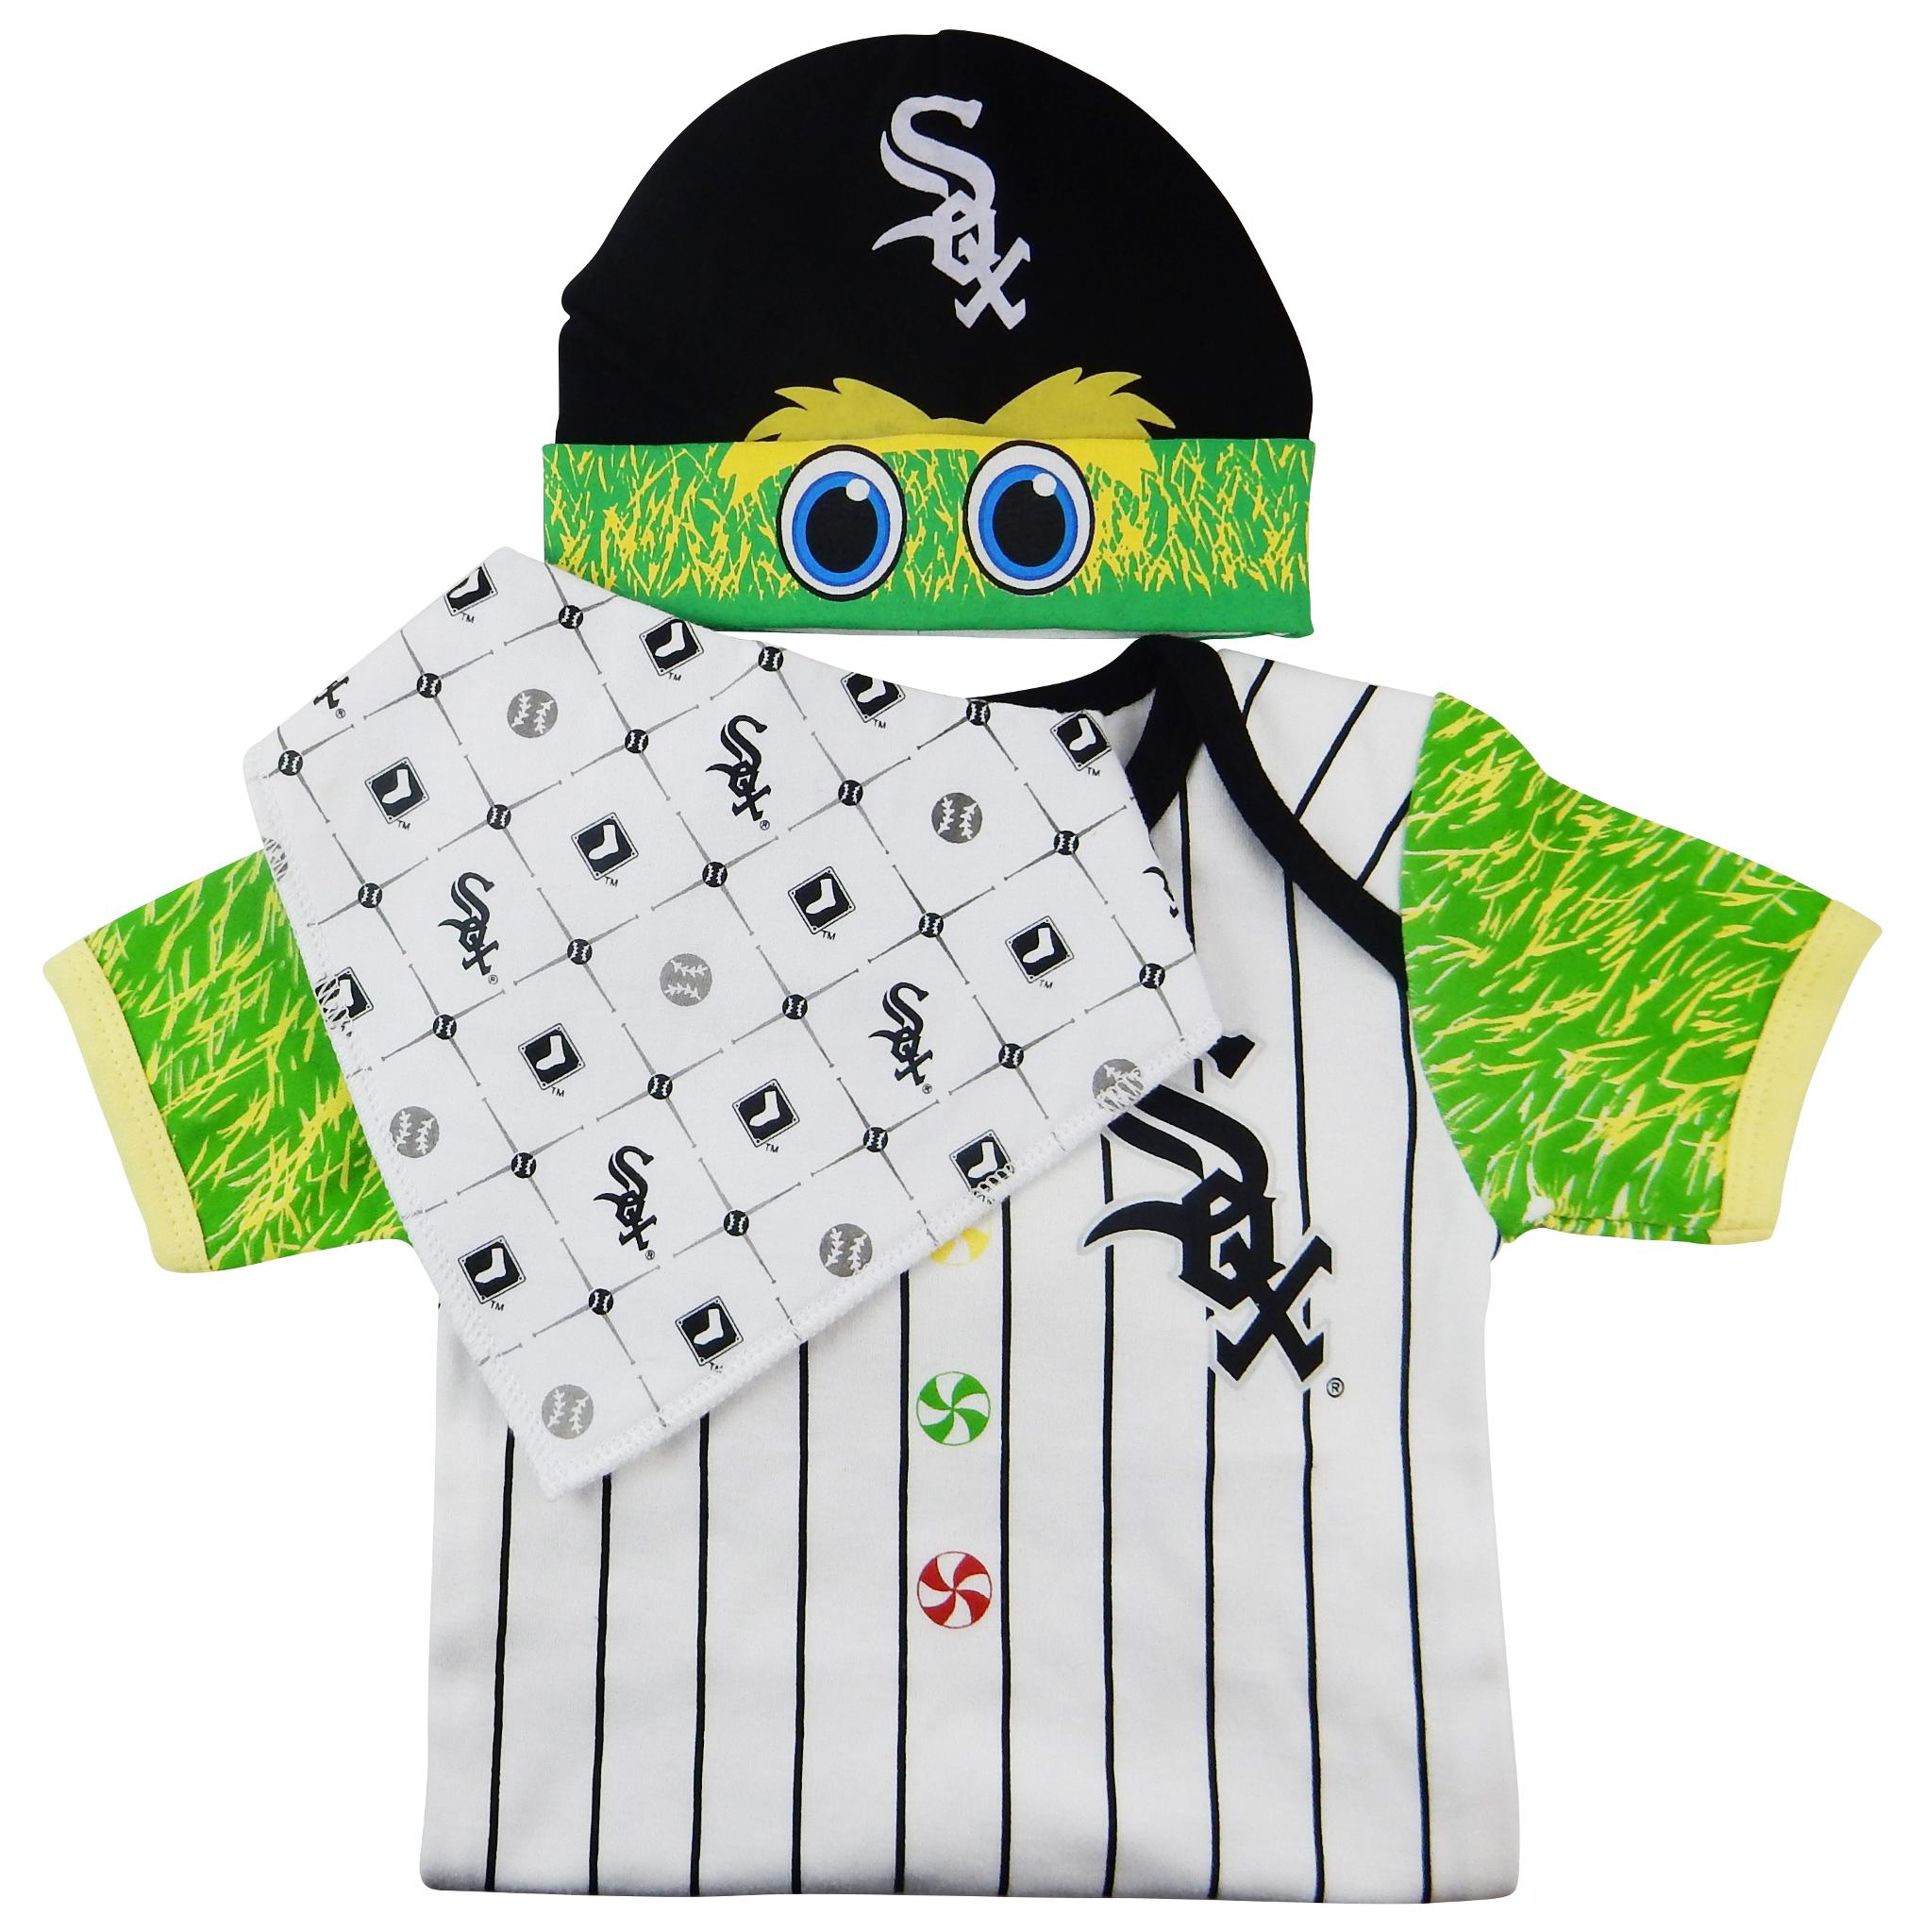 Chicago White Sox on X: Share your love for the #WhiteSox with